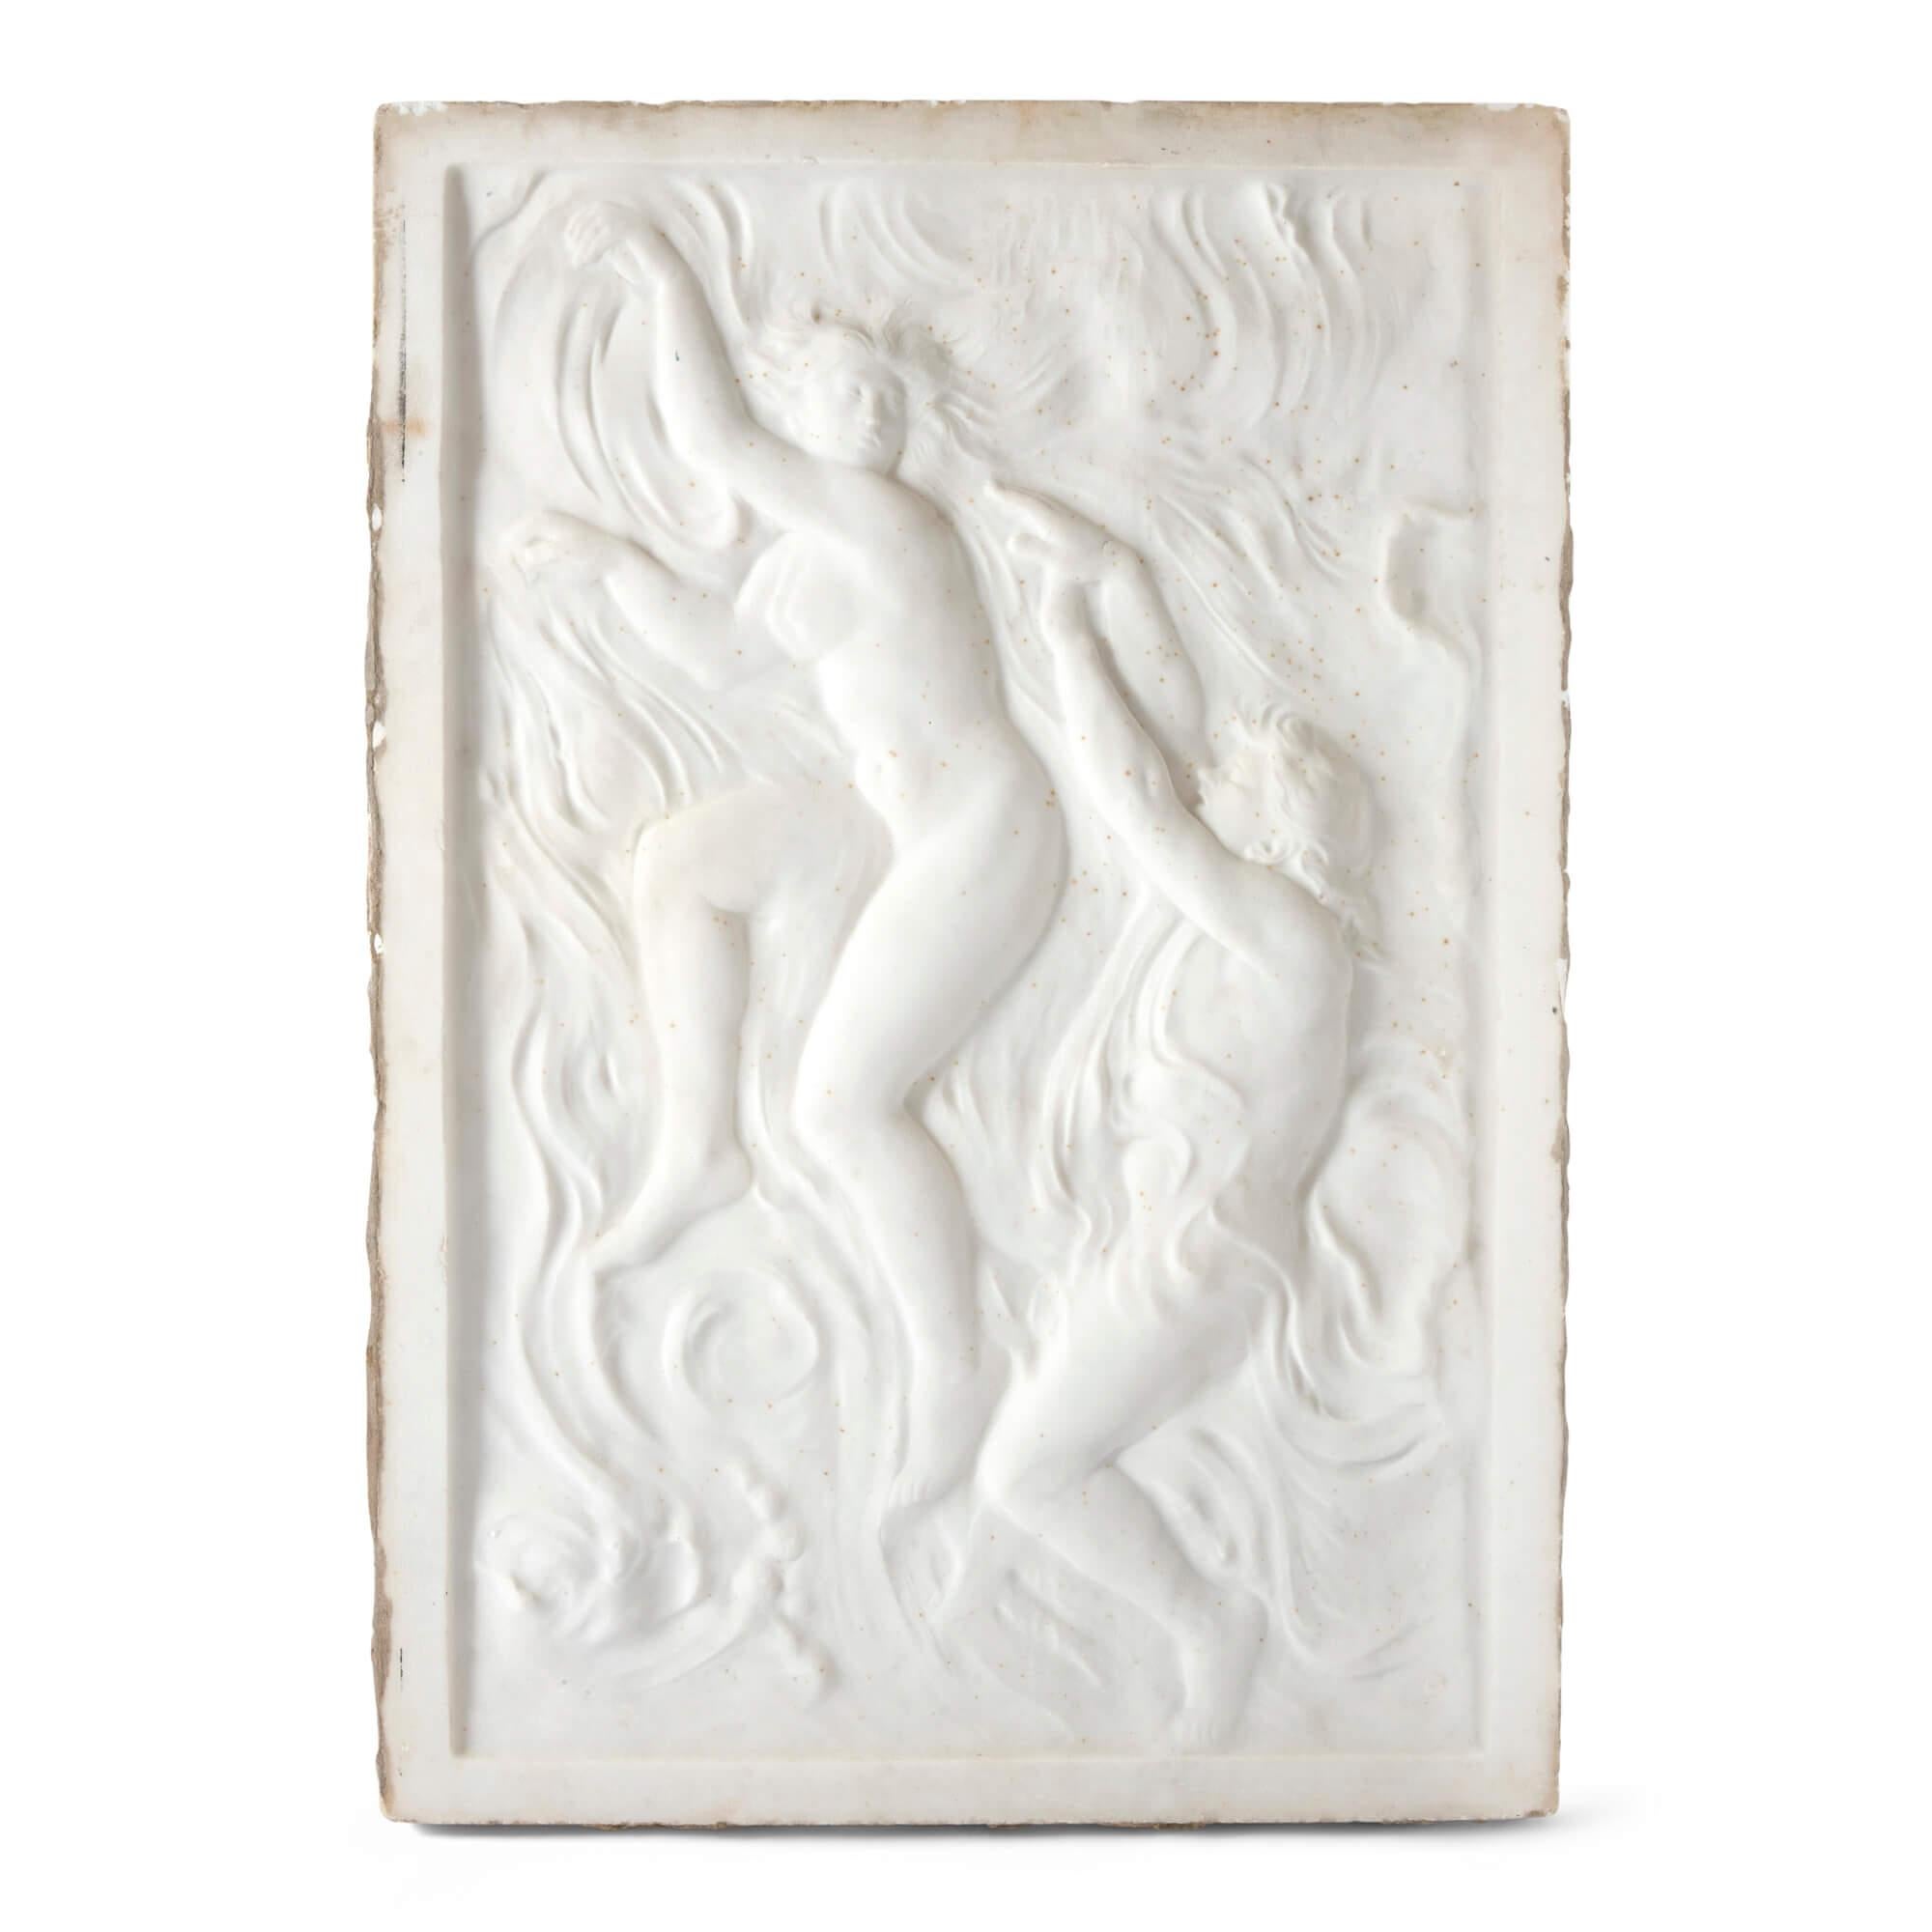 Large marble figurative relief panel by Pegram 
English, Early 20th Century 
Plaque: Height 102cm, width 70cm, depth 9cm
Frame: Height 109cm, width 89cm, depth 2cm

This bright white marble relief panel is crafted by Henry Alfred Pegram (English,